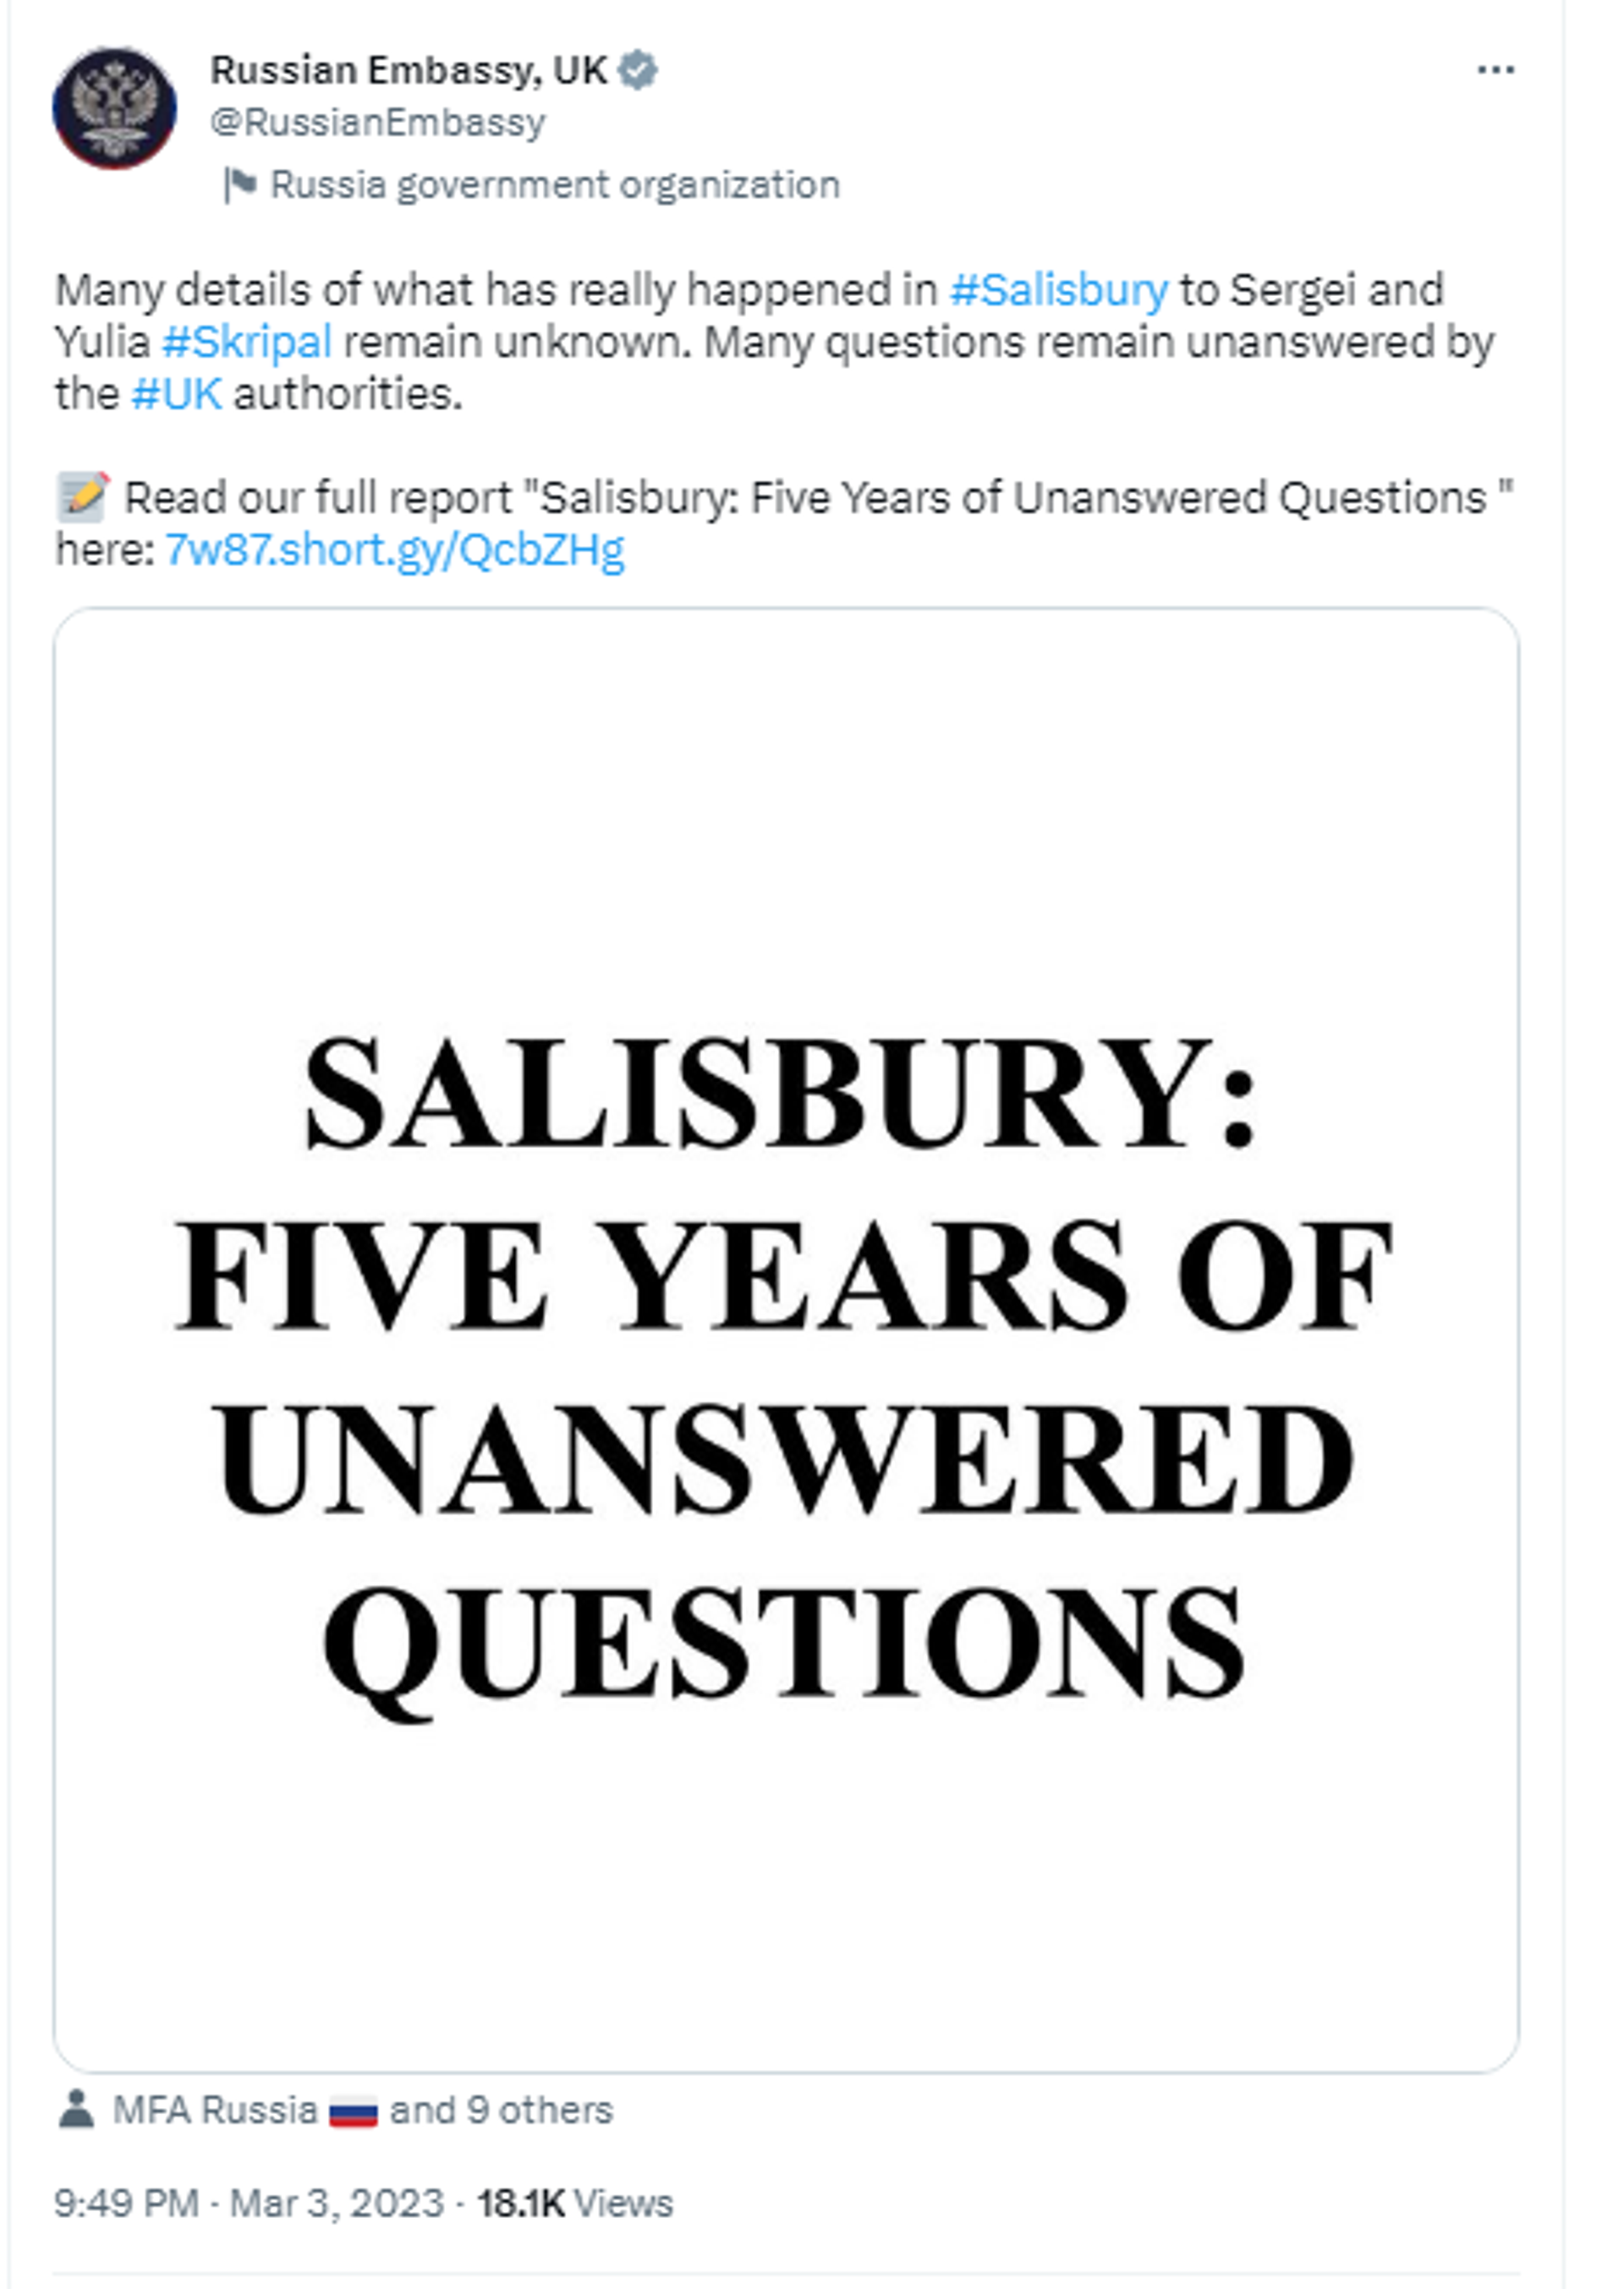 Twitter screenshot of post made by Russian Embassy in London on March 3, 2023, with an attached report, Salisbury: Five Years of Unanswered Questions. - Sputnik International, 1920, 04.03.2023